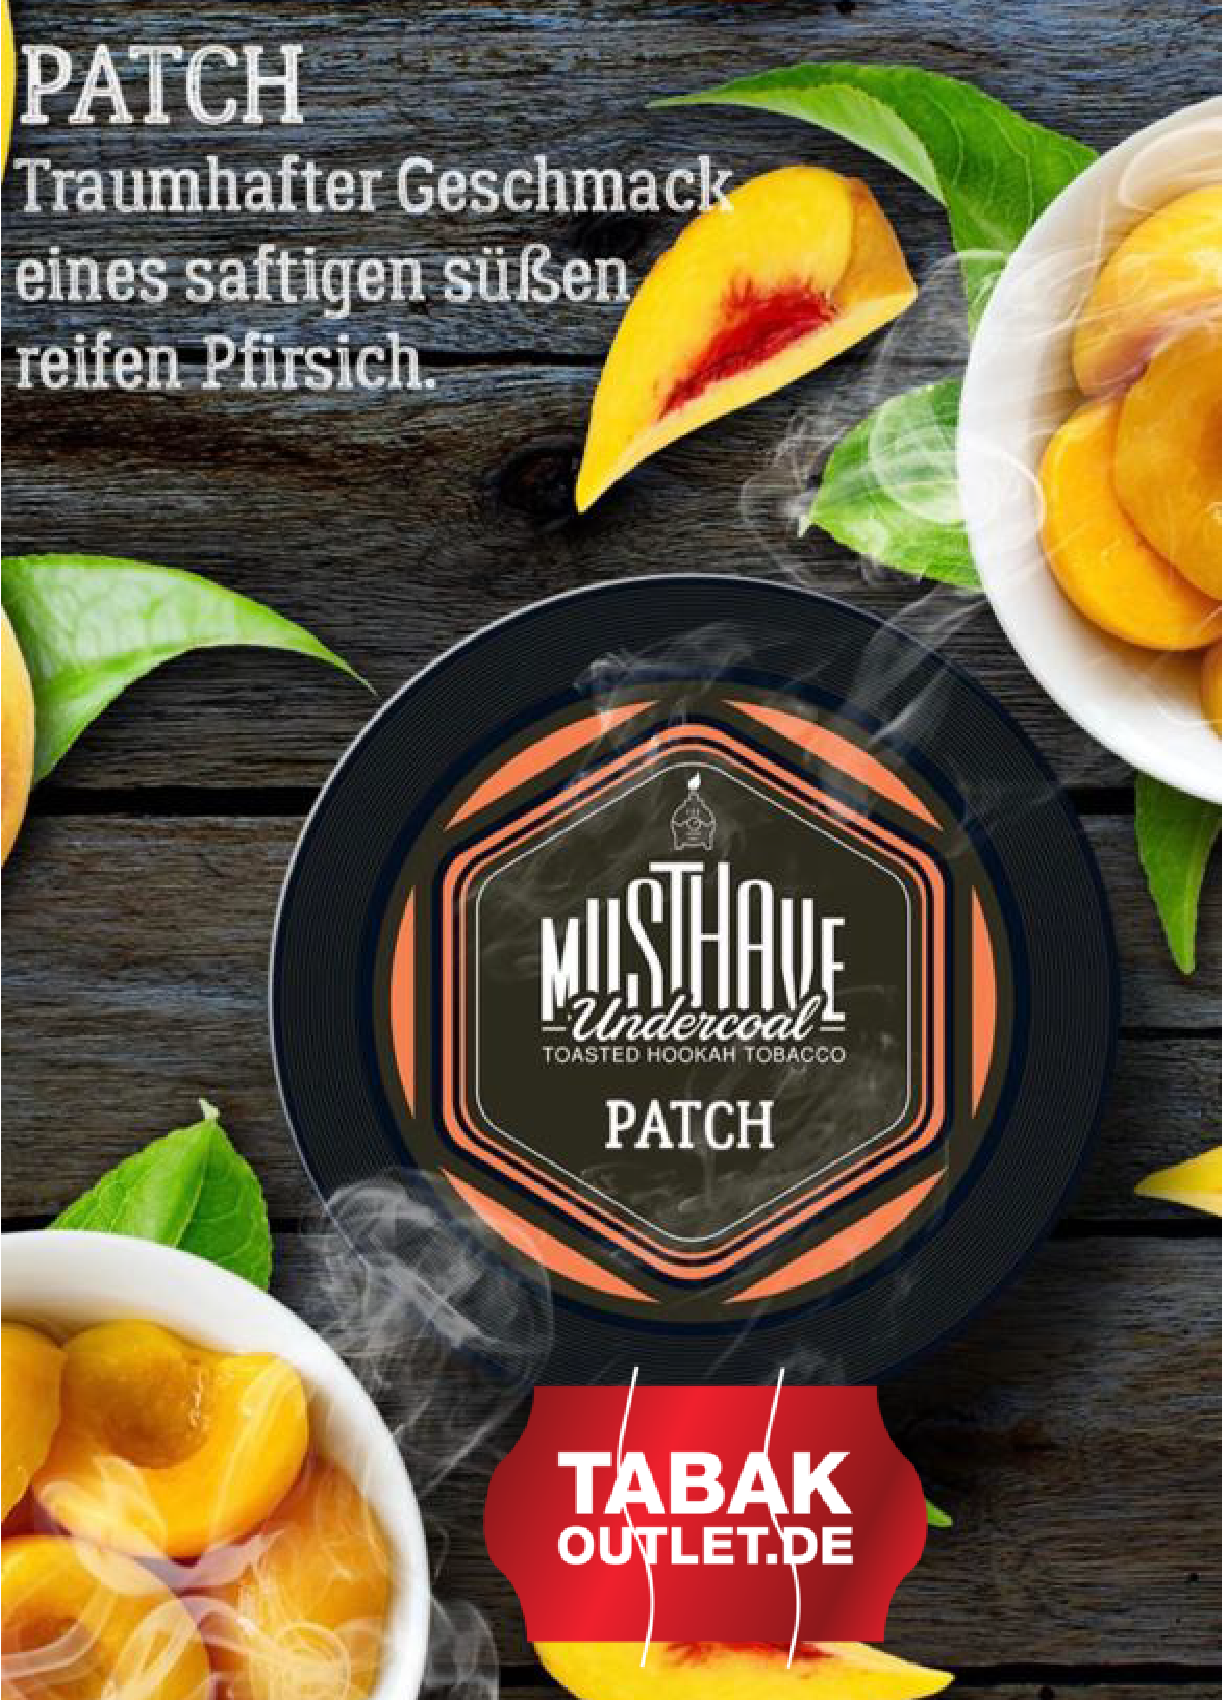 Musthave Patch - reifer Pfirsich 25g Dose